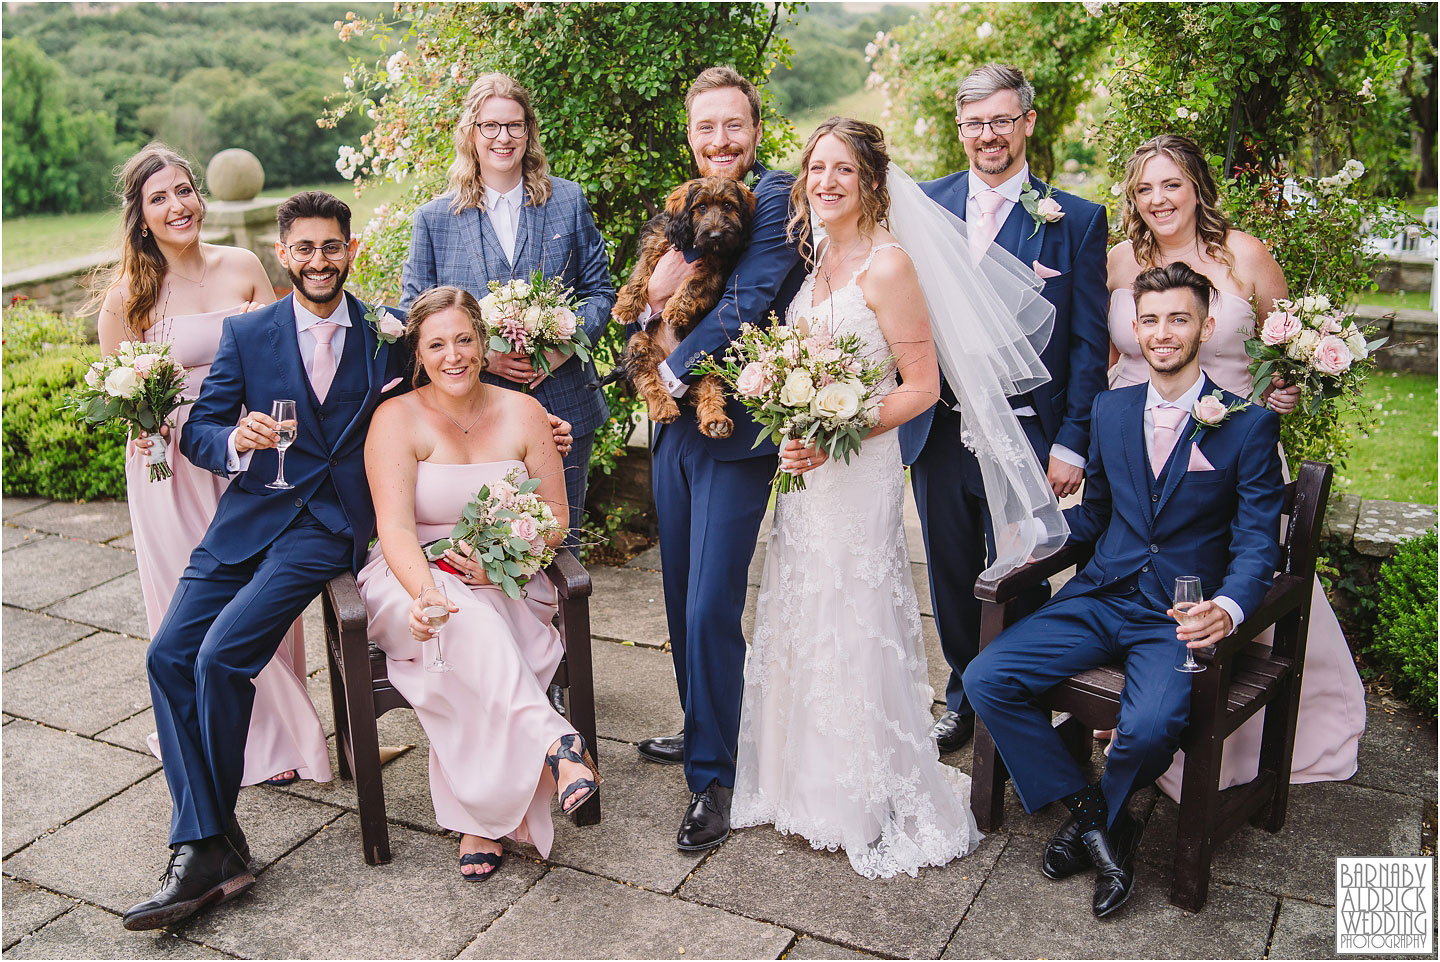 Wood Hall Hotel wedding party group photos, Wood Hall Wedding Photos, Wood Hall Wedding Photographer